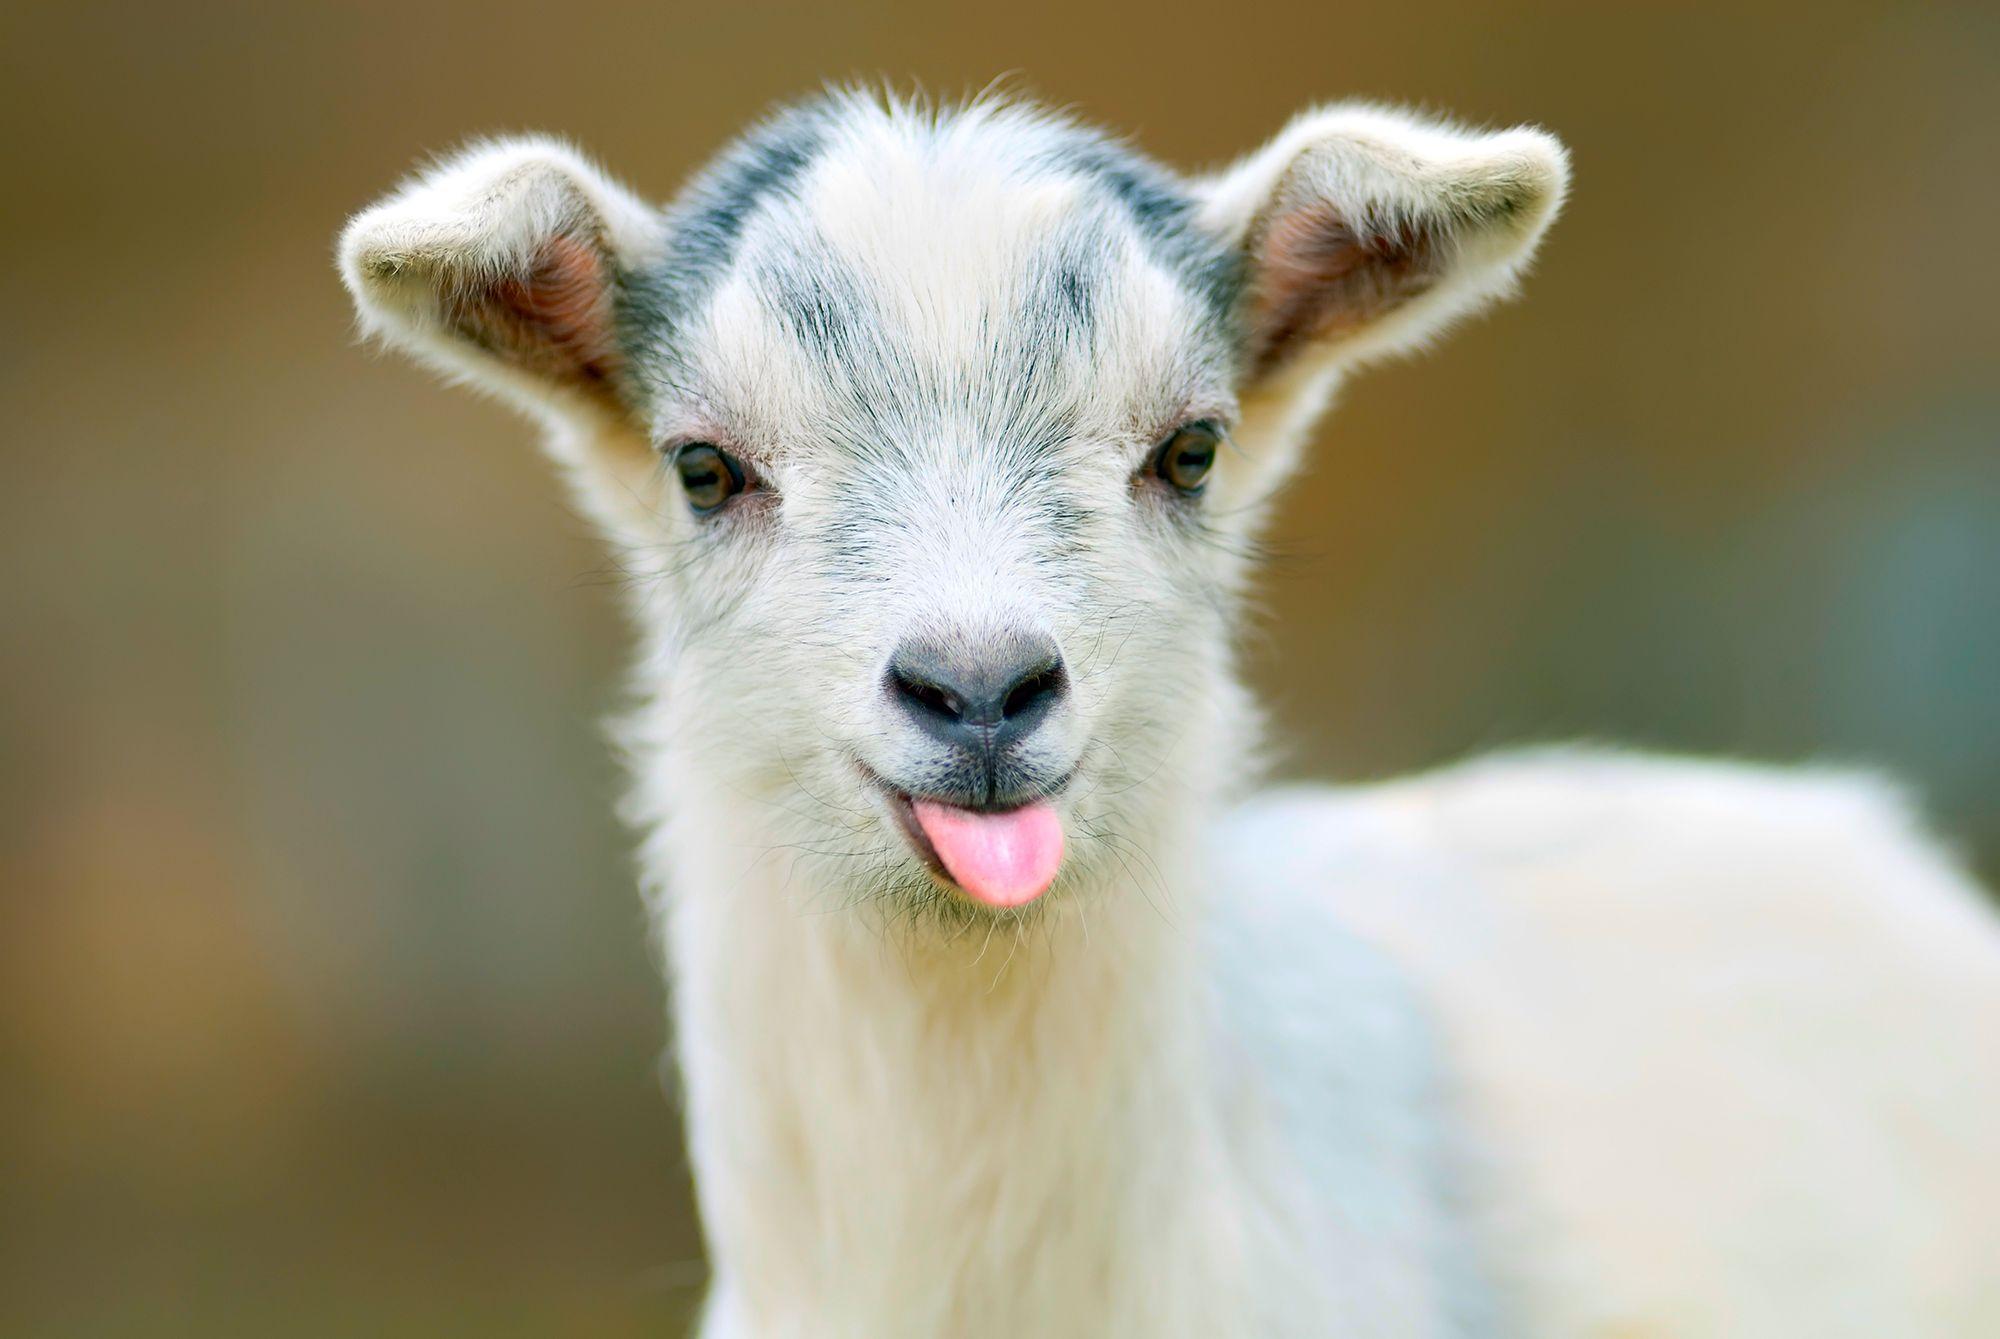 Airline with Goat Logo - Goats Banned From Flying American Airlines Starting in July